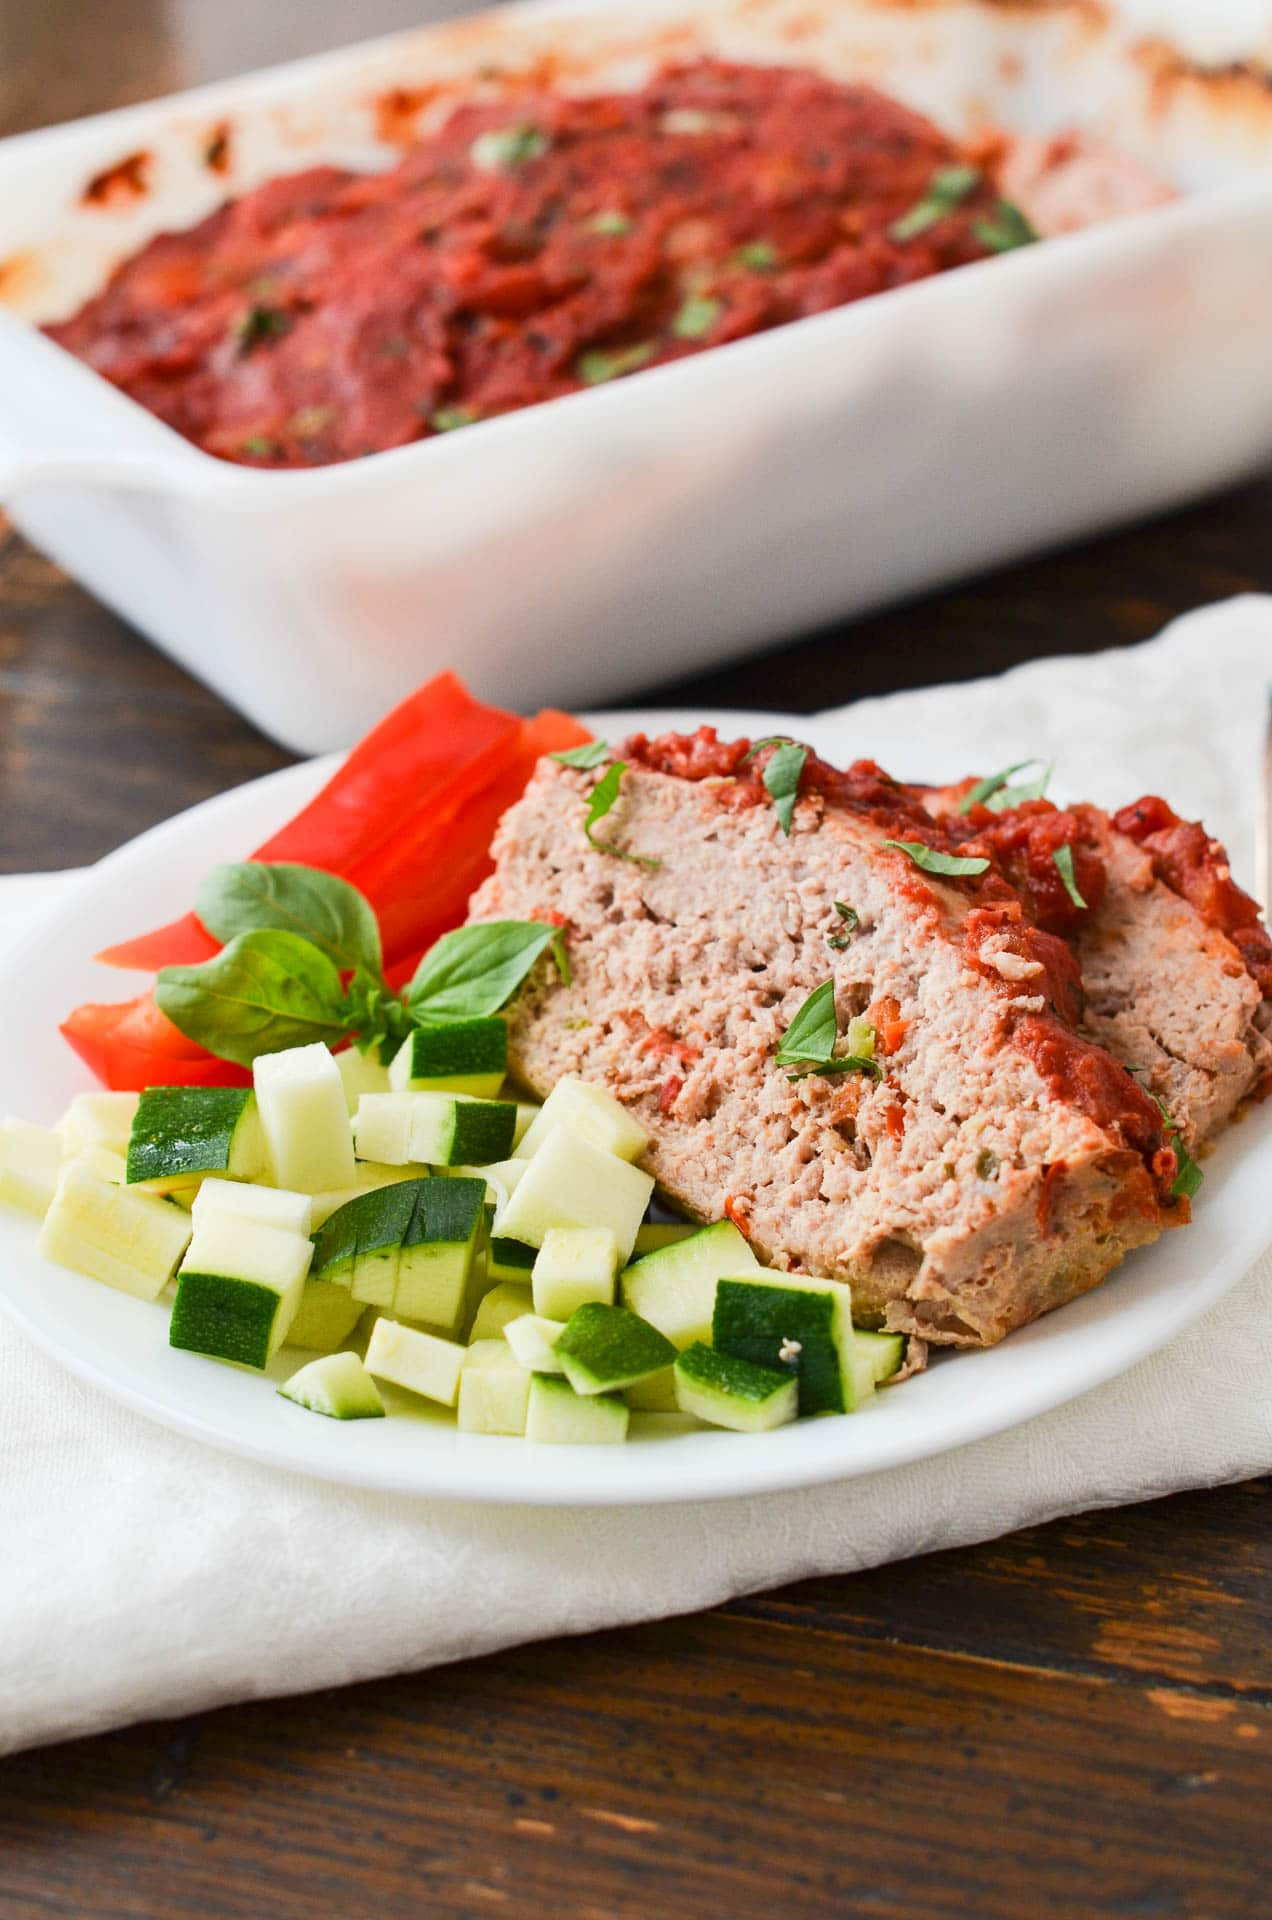 How To Make Turkey Meatloaf
 How To Make The BEST EASY Paleo Turkey Meatloaf